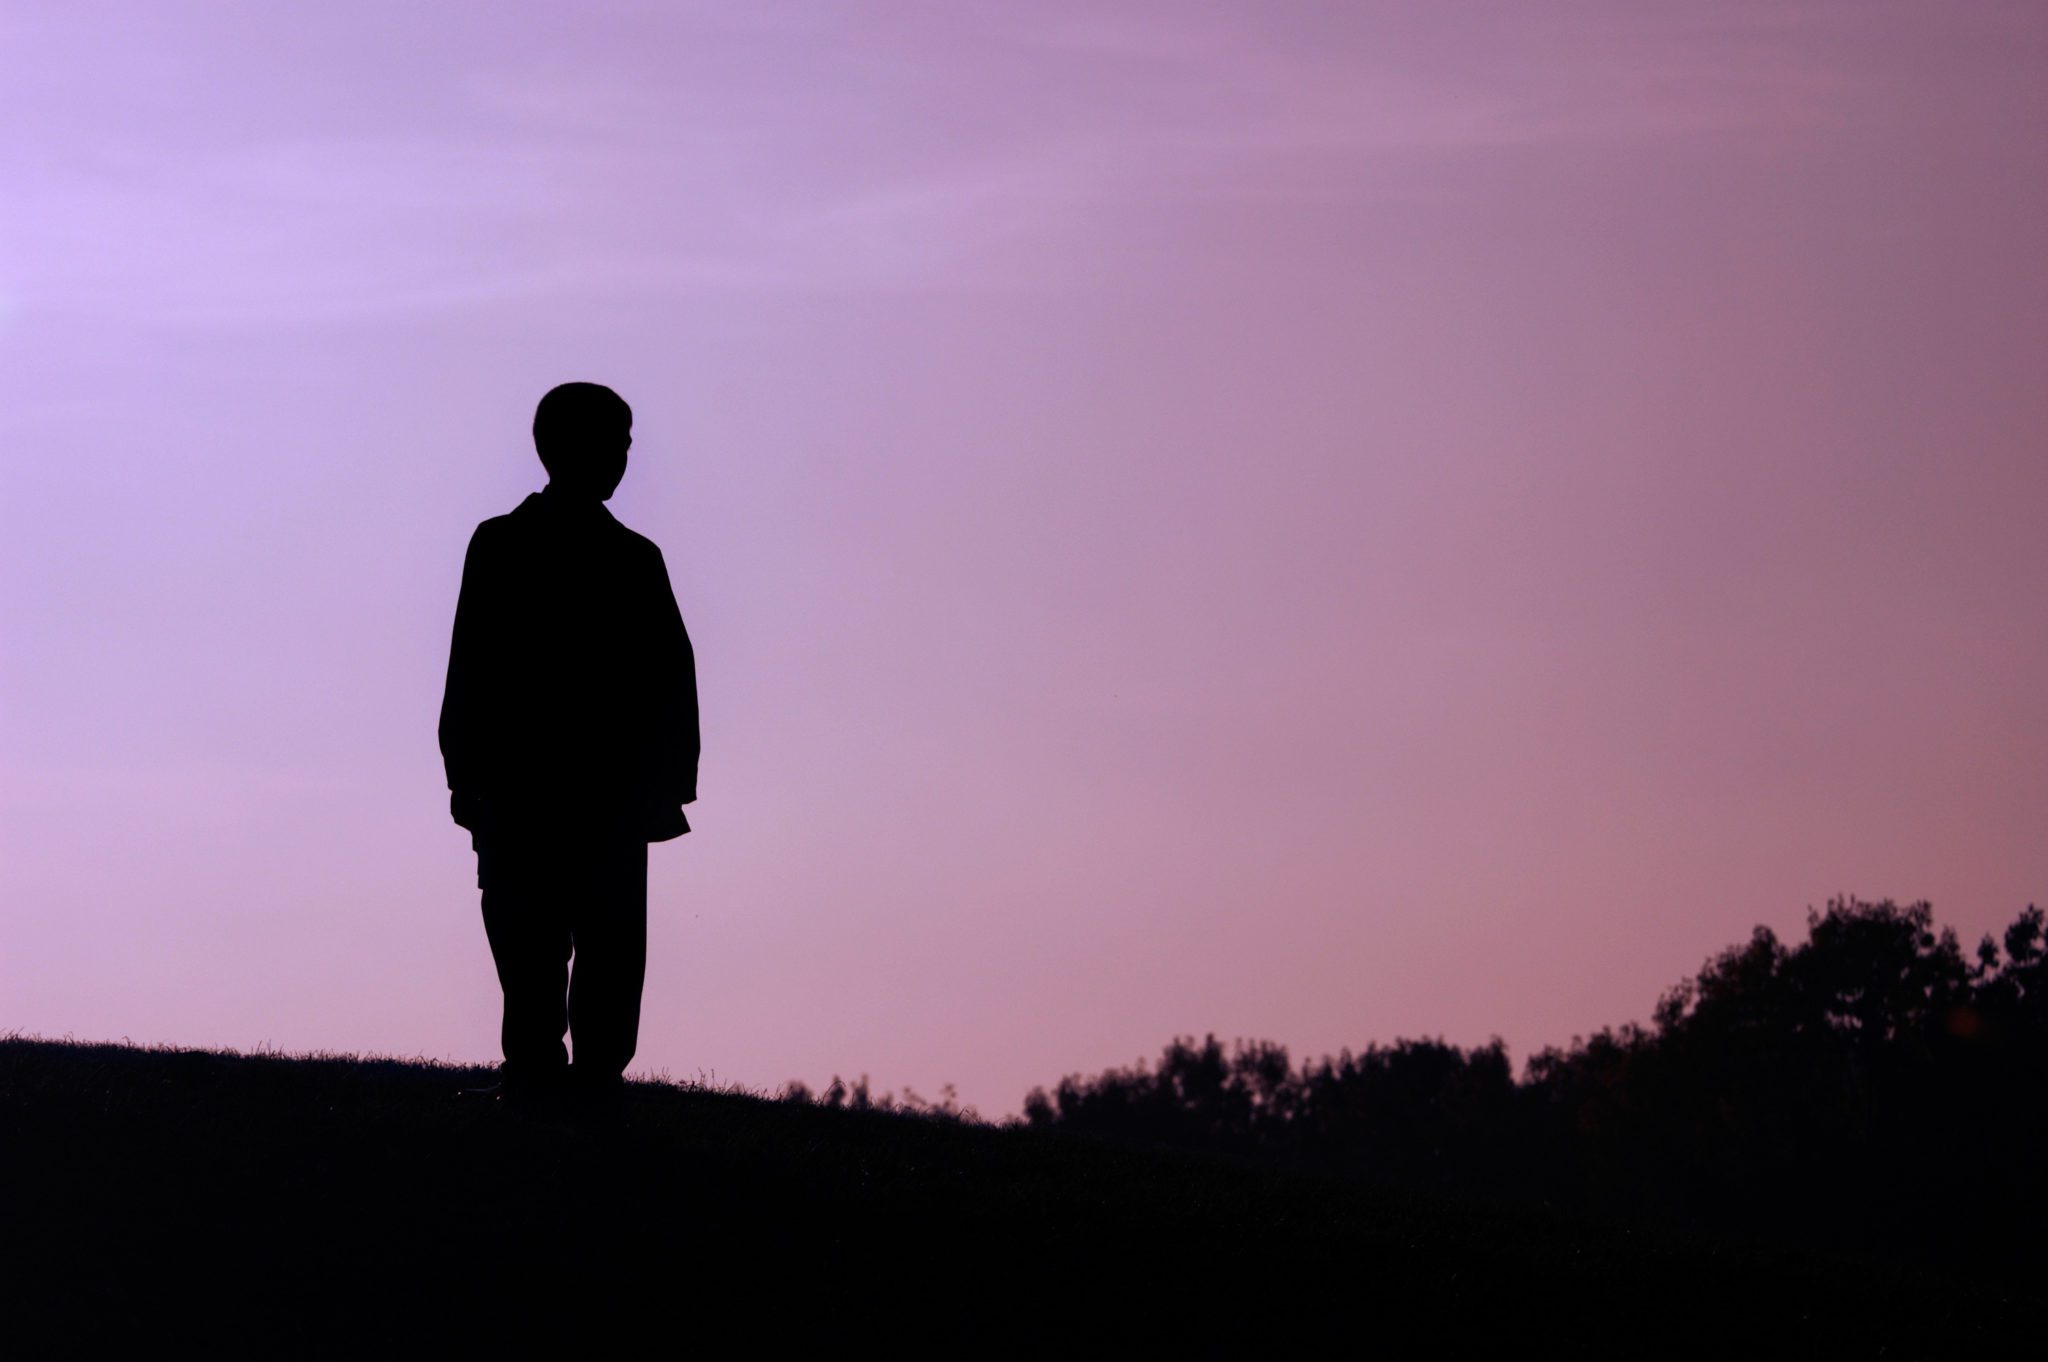 Boy standing alone on a hill dark silhouette over evening sky